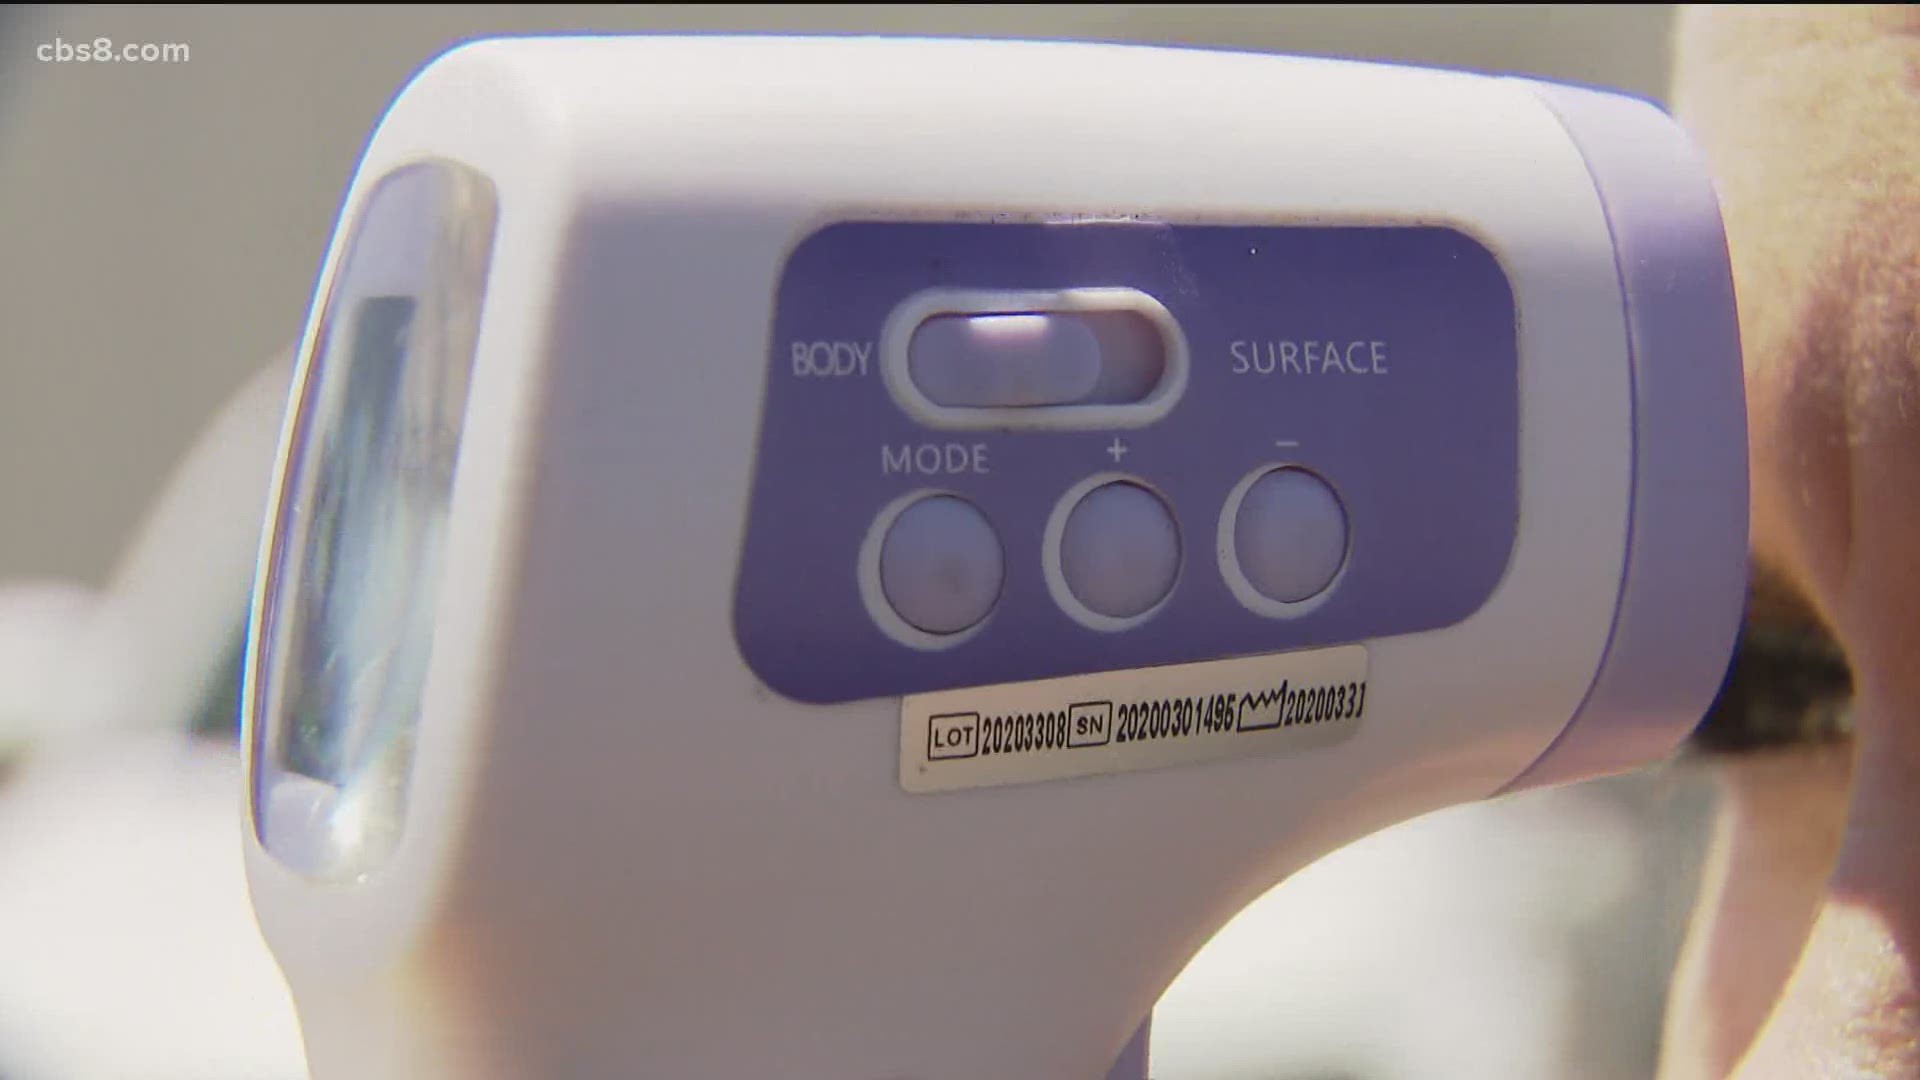 VERIFY: Can being outside impact your temperature?